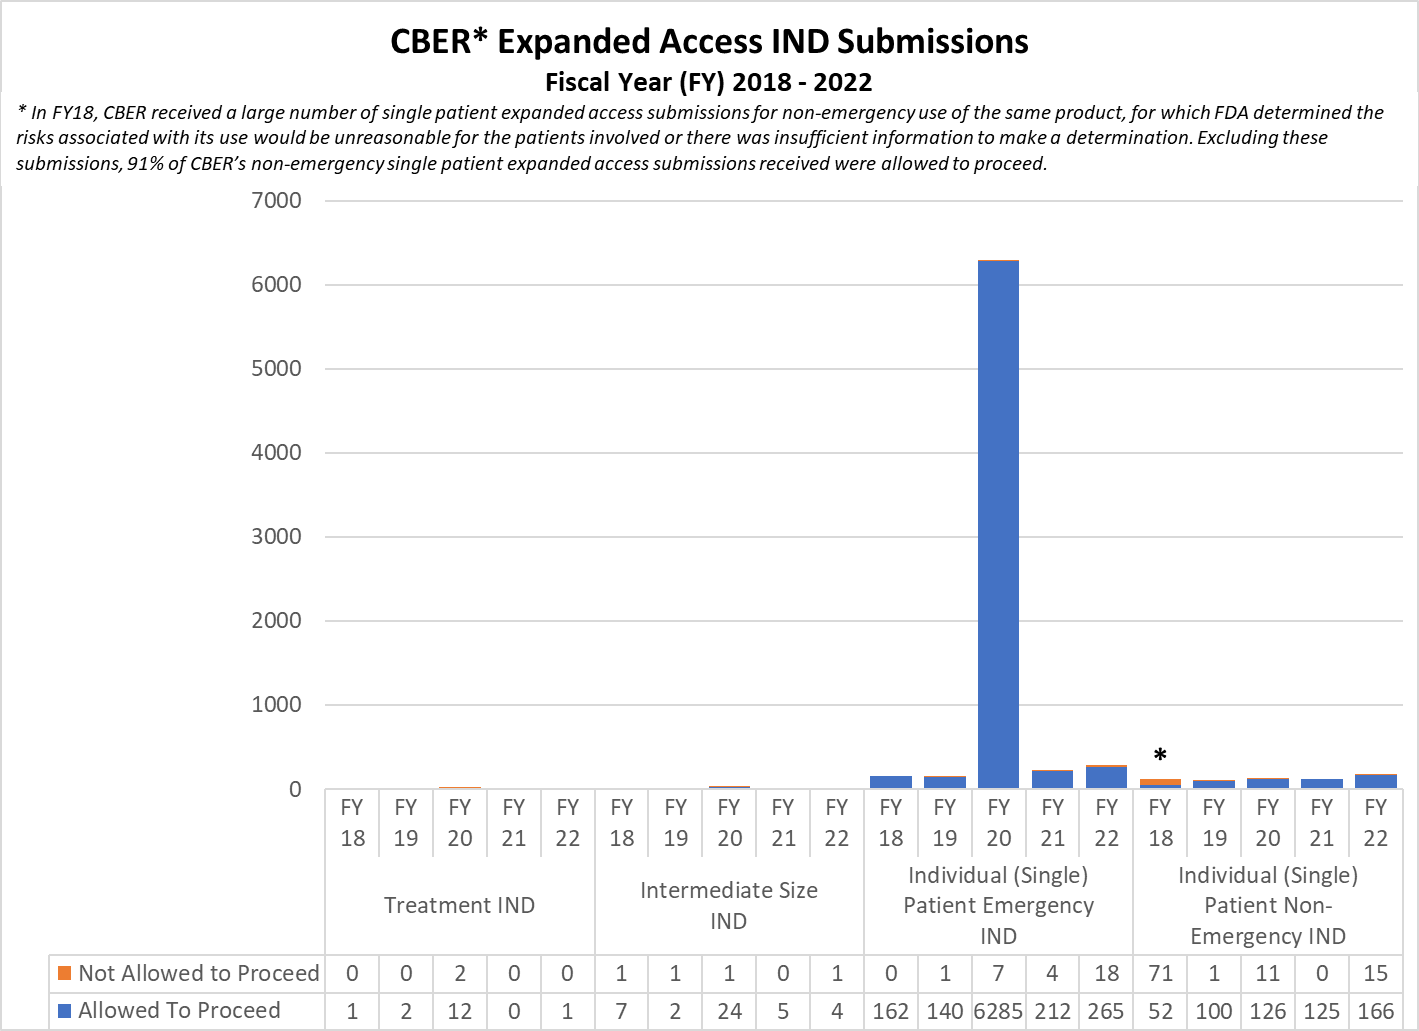 CBER Expanded Access IND Submissions Fiscal Year (FY) 2018 -2022